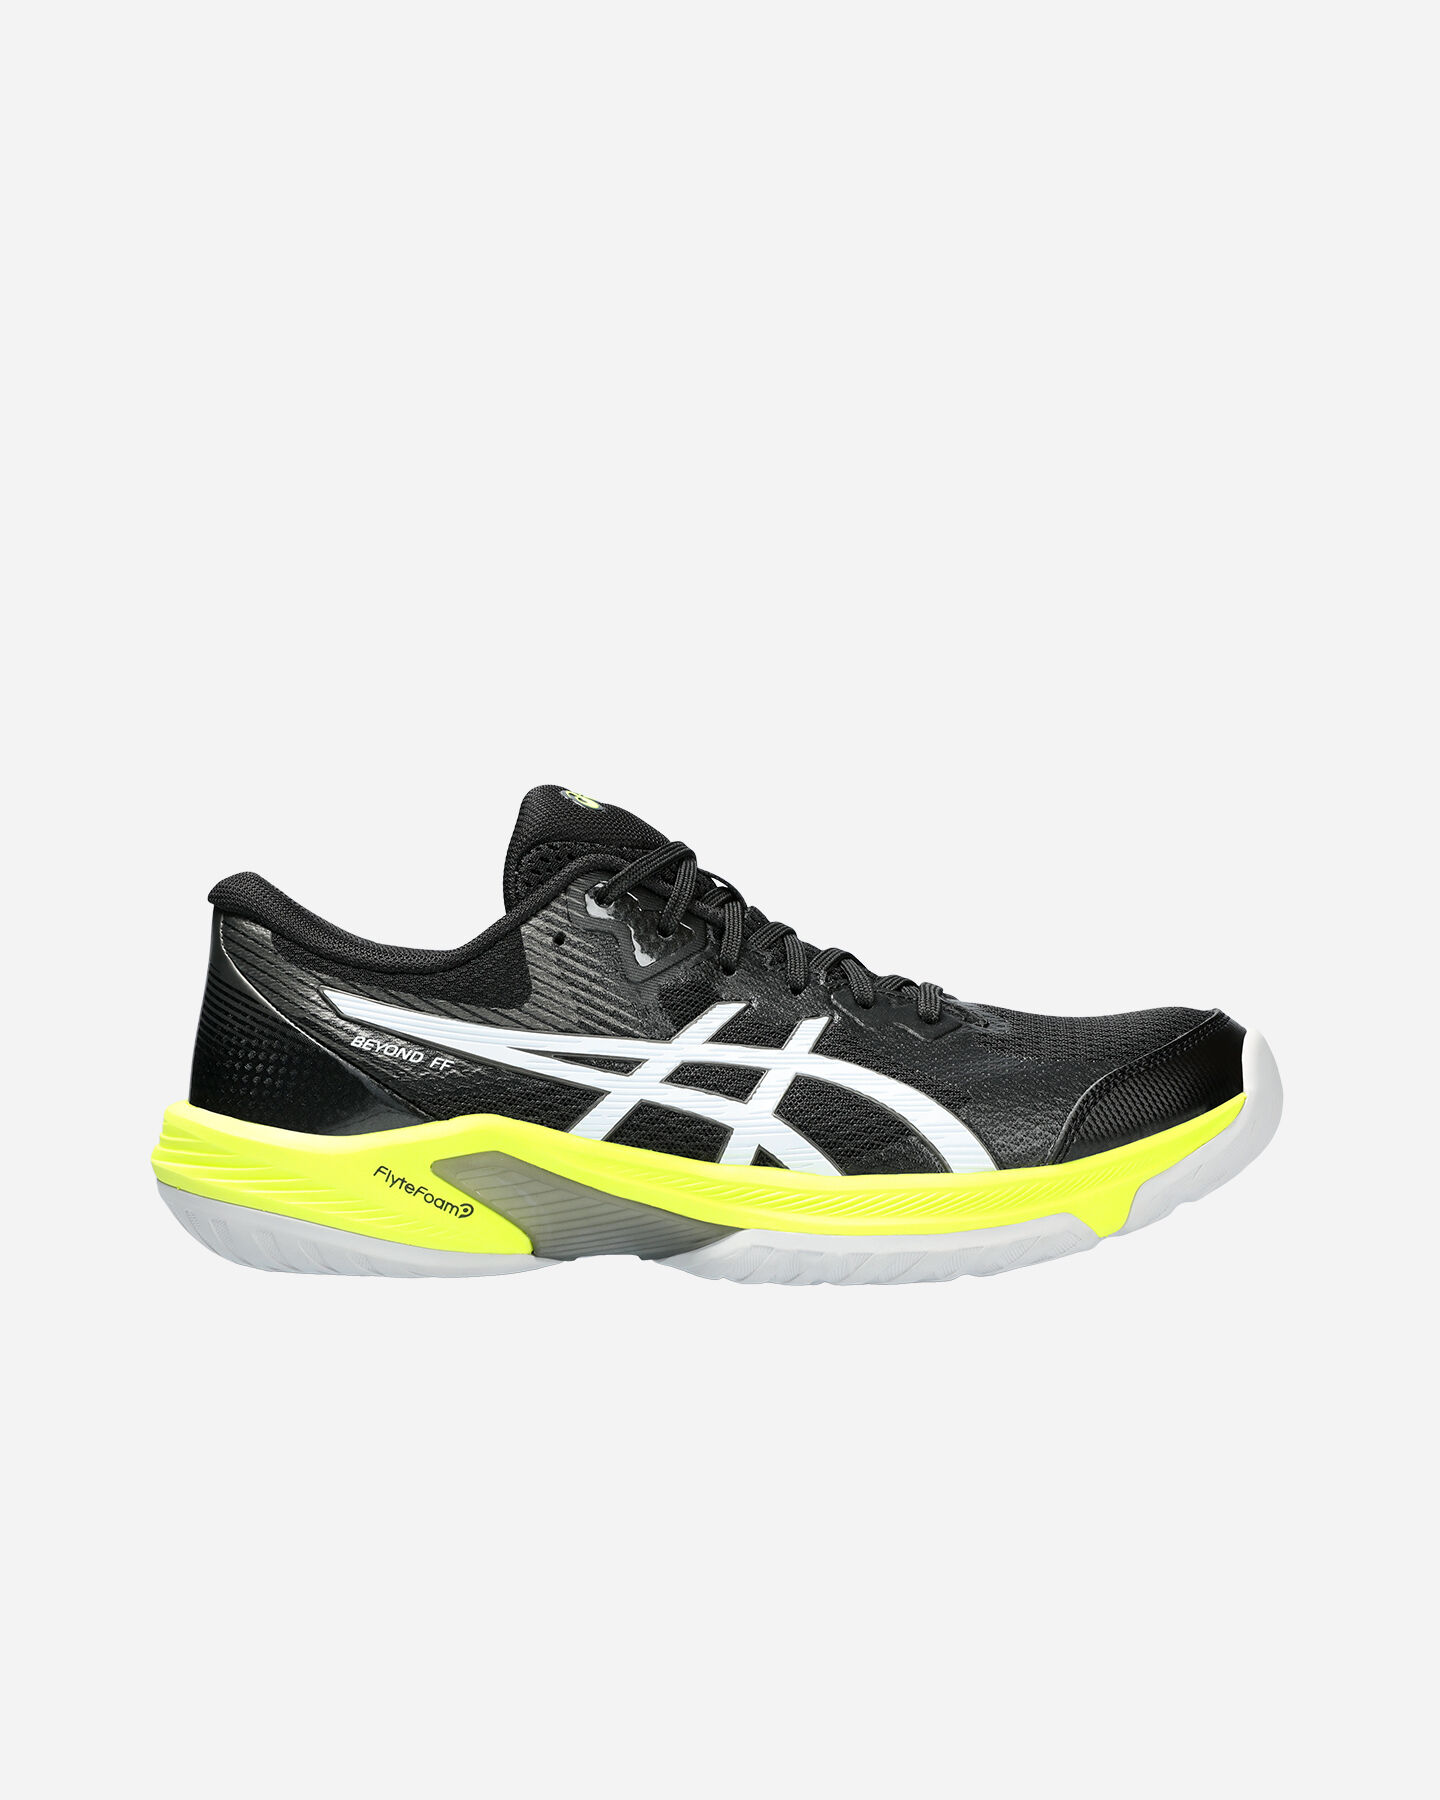  Scarpe volley ASICS BEYOND M S5585380|001|8 scatto 0